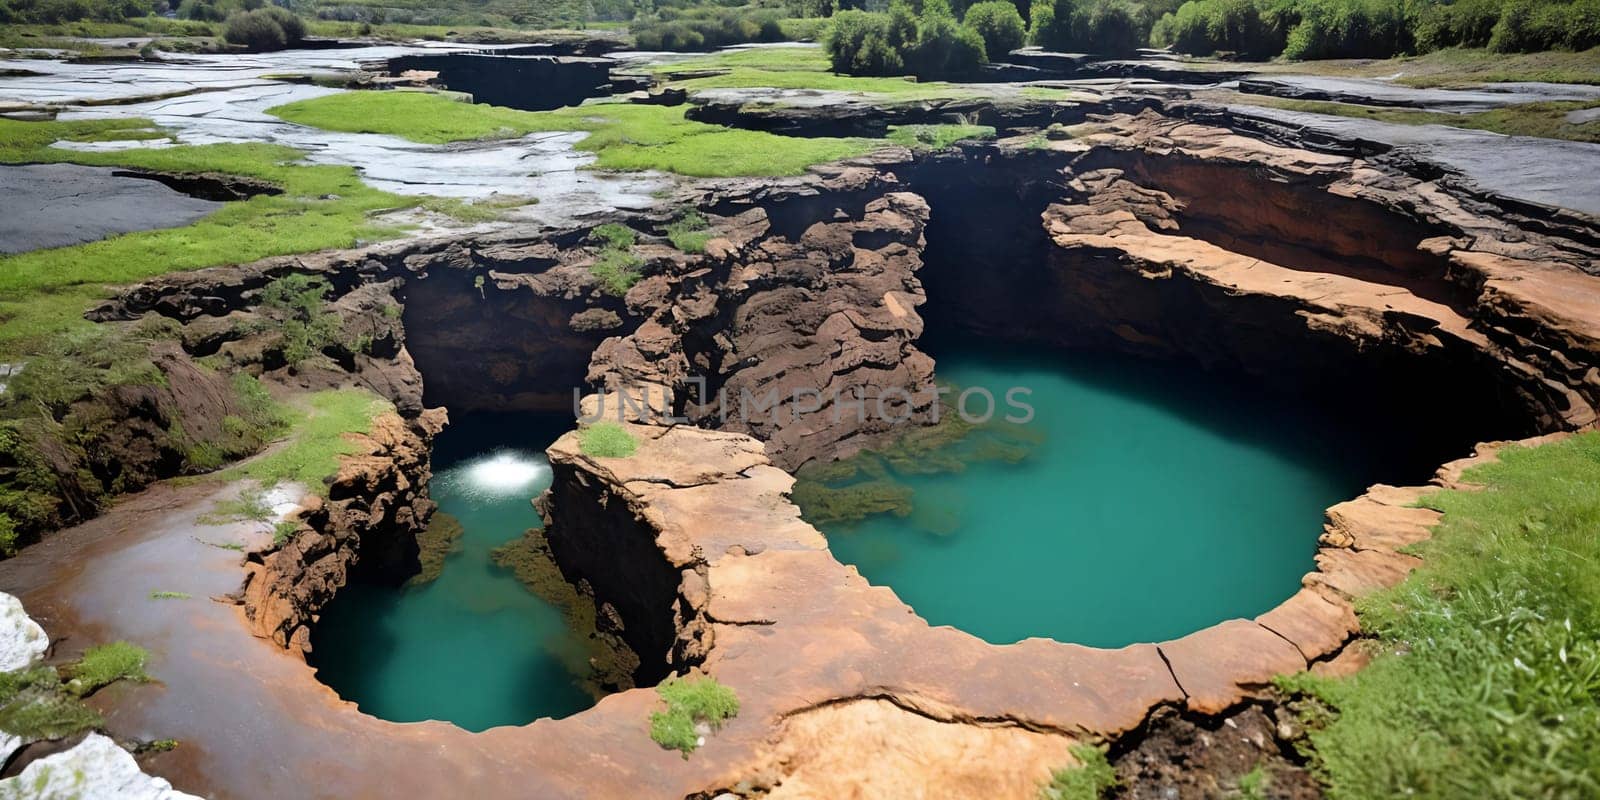 The surreal sight of a sinkhole swallowing up a section of land, showcasing the sudden and dramatic geological event with a focus on the gaping hole and crumbling surroundings. Panorama